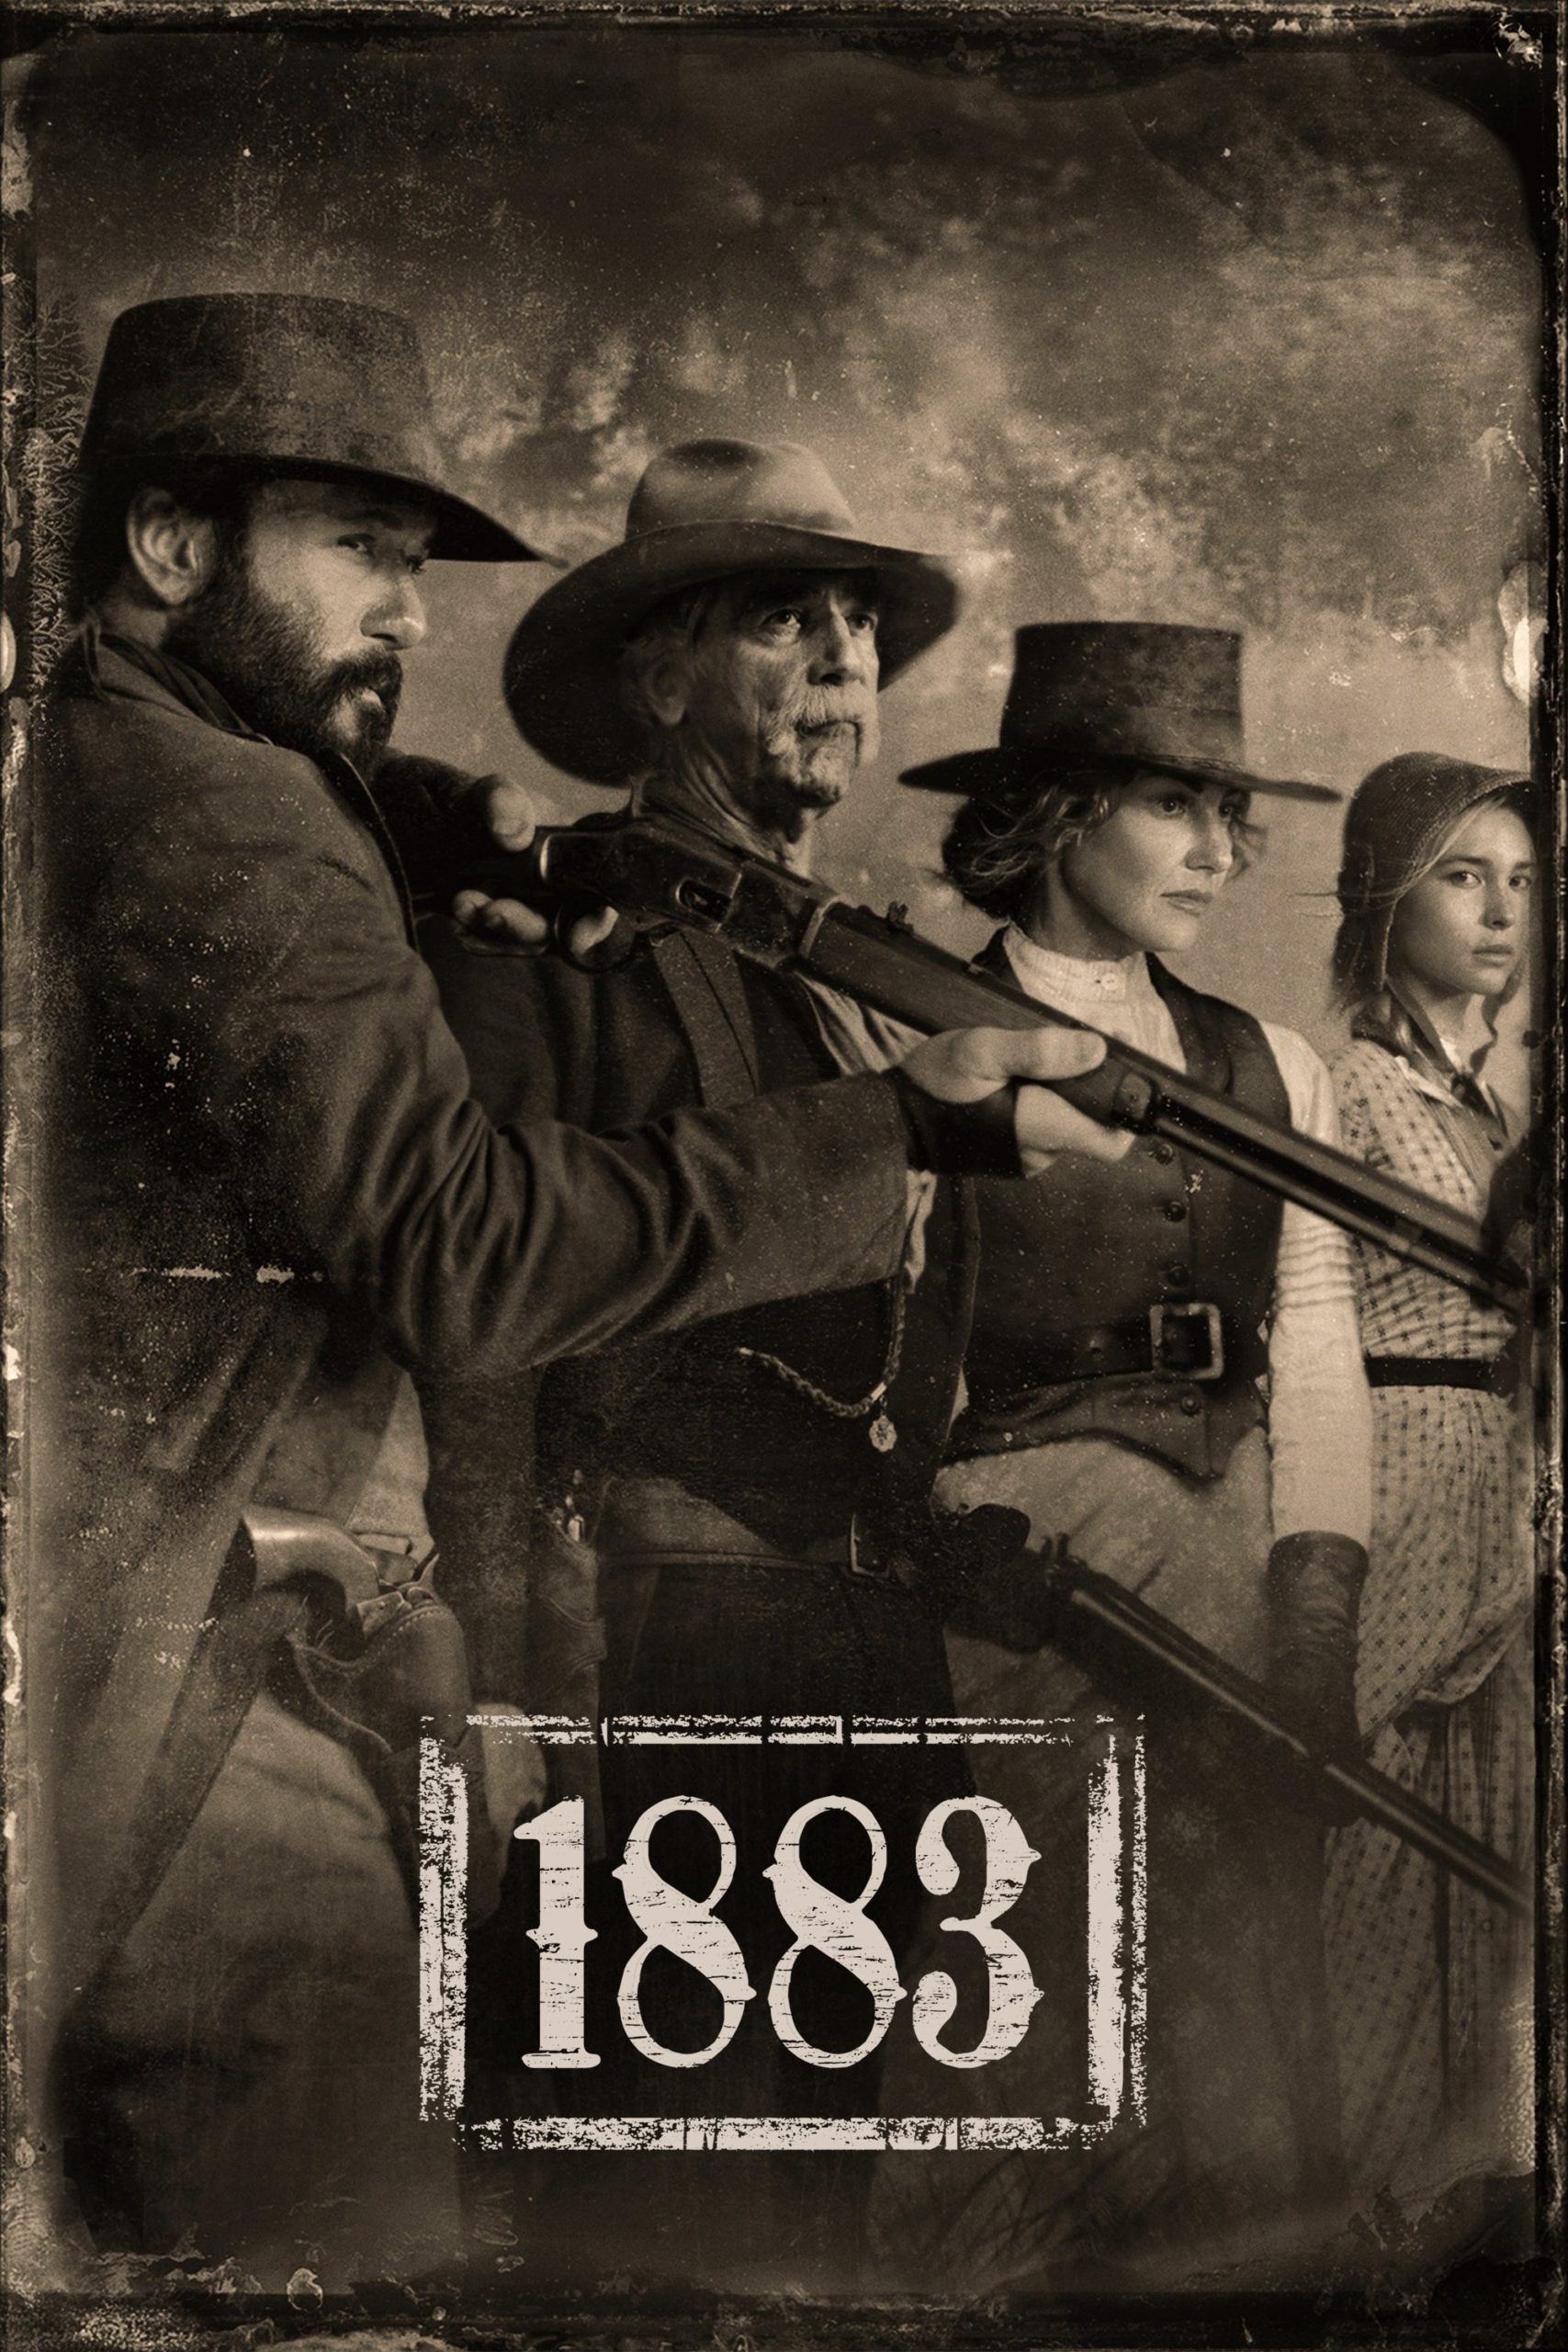 Poster for the limited television series "1883" from Paramount + Network, starring Tim McGraw, Sam Elliott, Faith Hill and Isabel May, created, directed at times and written by Taylor Sheridan. Photo Cr: Paramount+ © 2022 MTV Entertainment Studios. All Rights Reserved. (2021-2022)